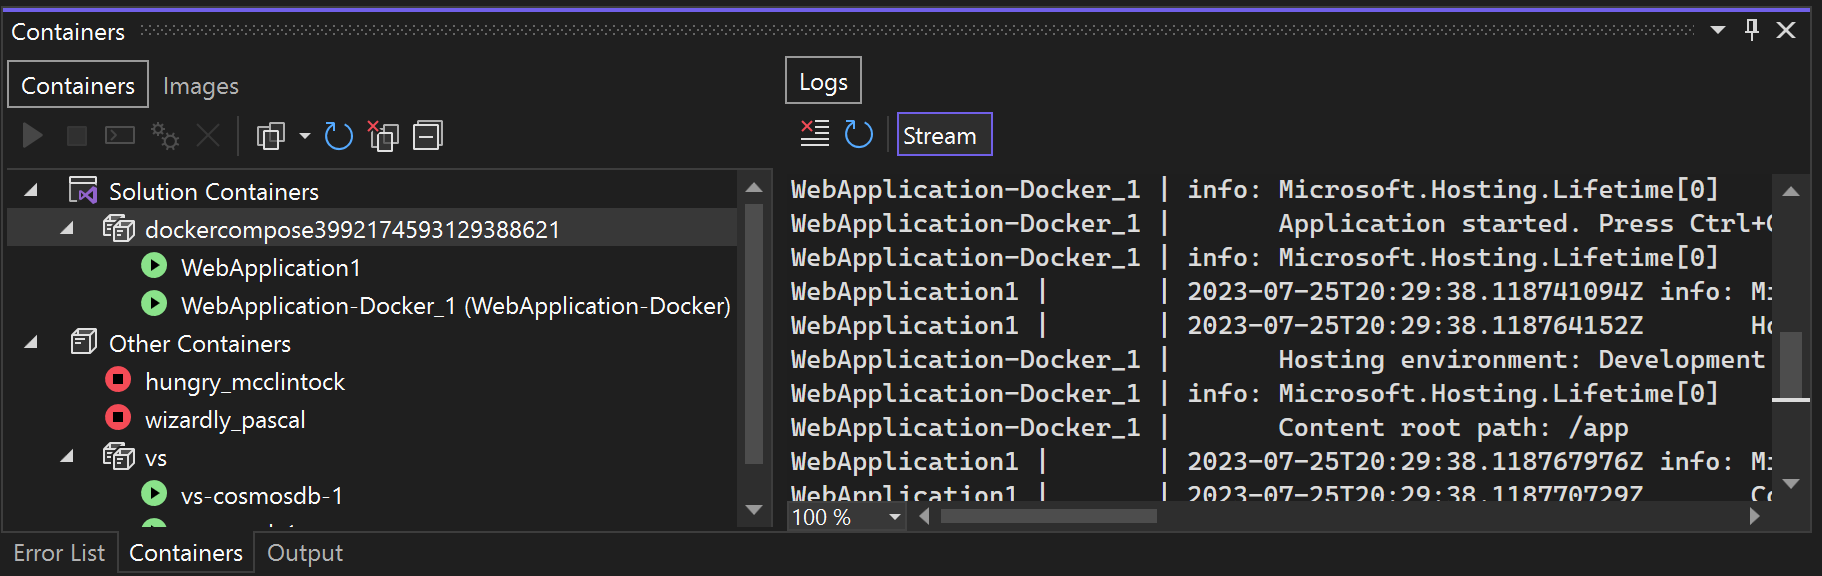 Screenshot showing Docker Compose nodes in the Containers window.